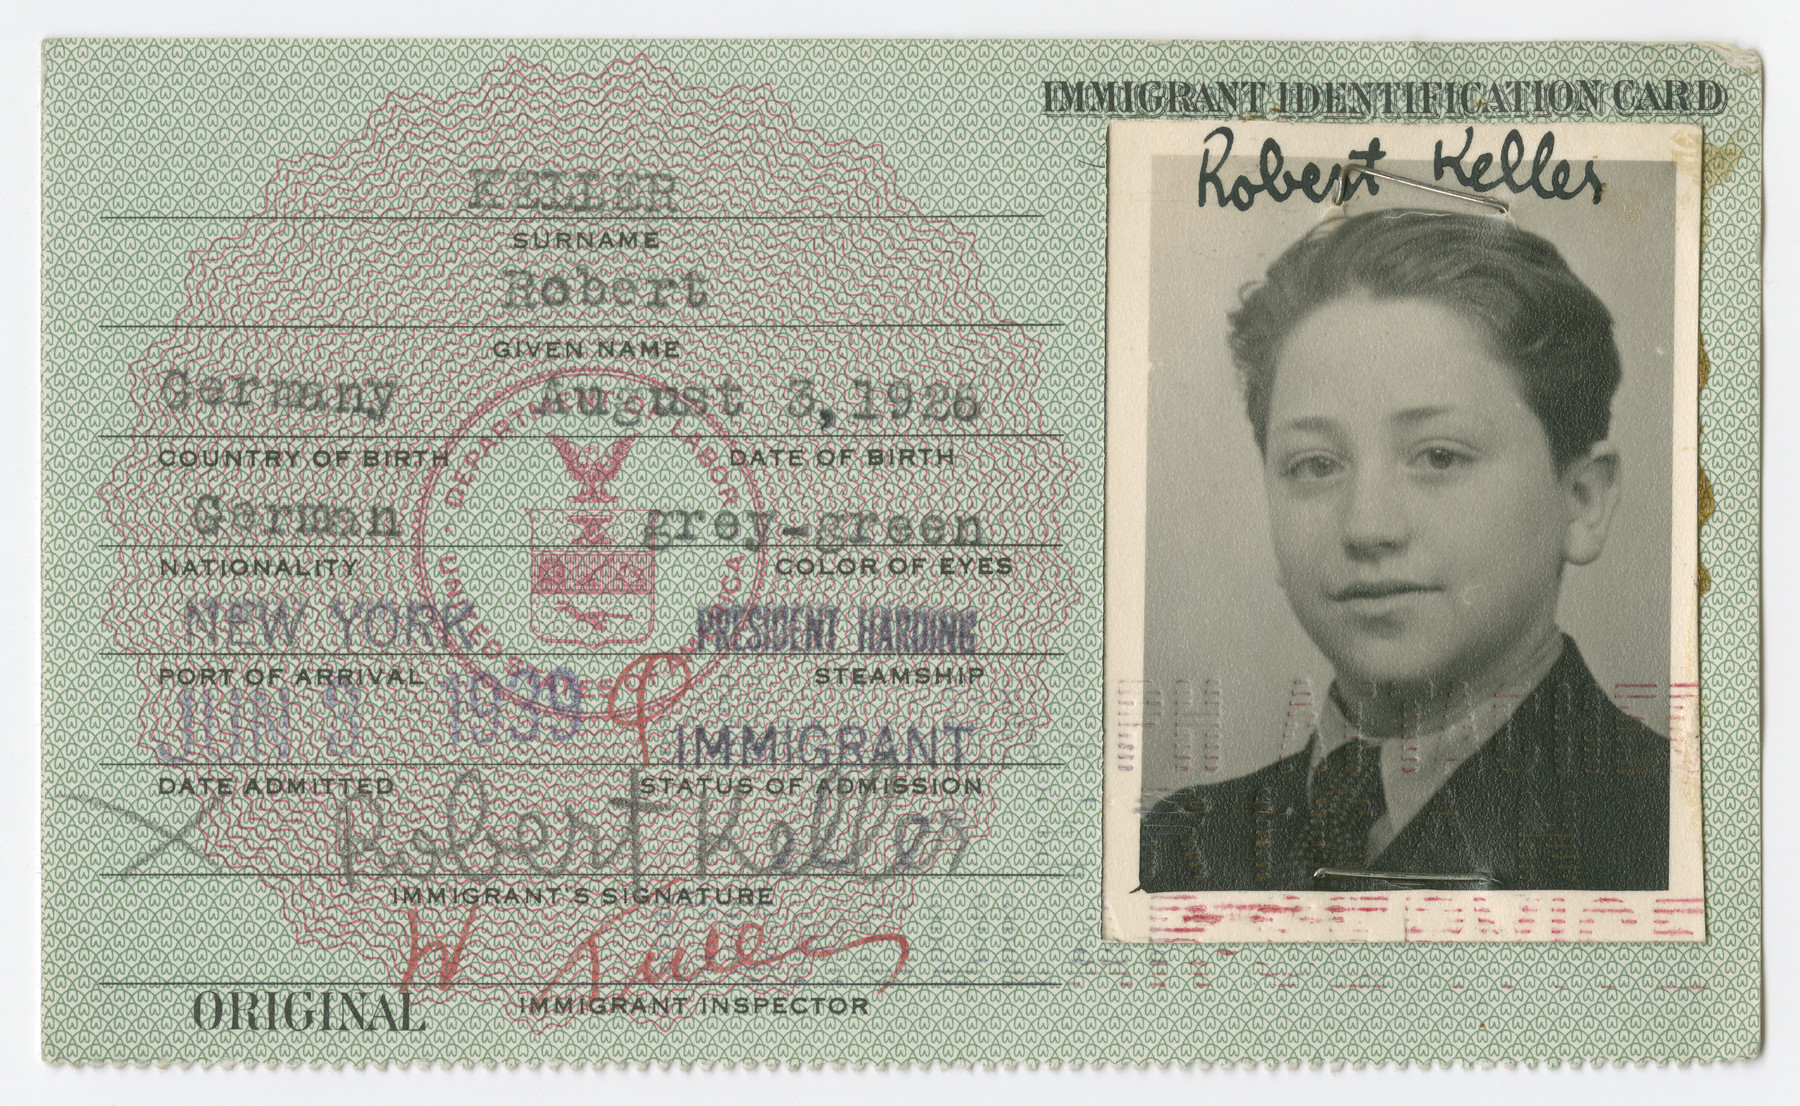 United States Immigrant Identification Card issued to Robert Keller.

It states he was born in Germany though he was born in Vienna.